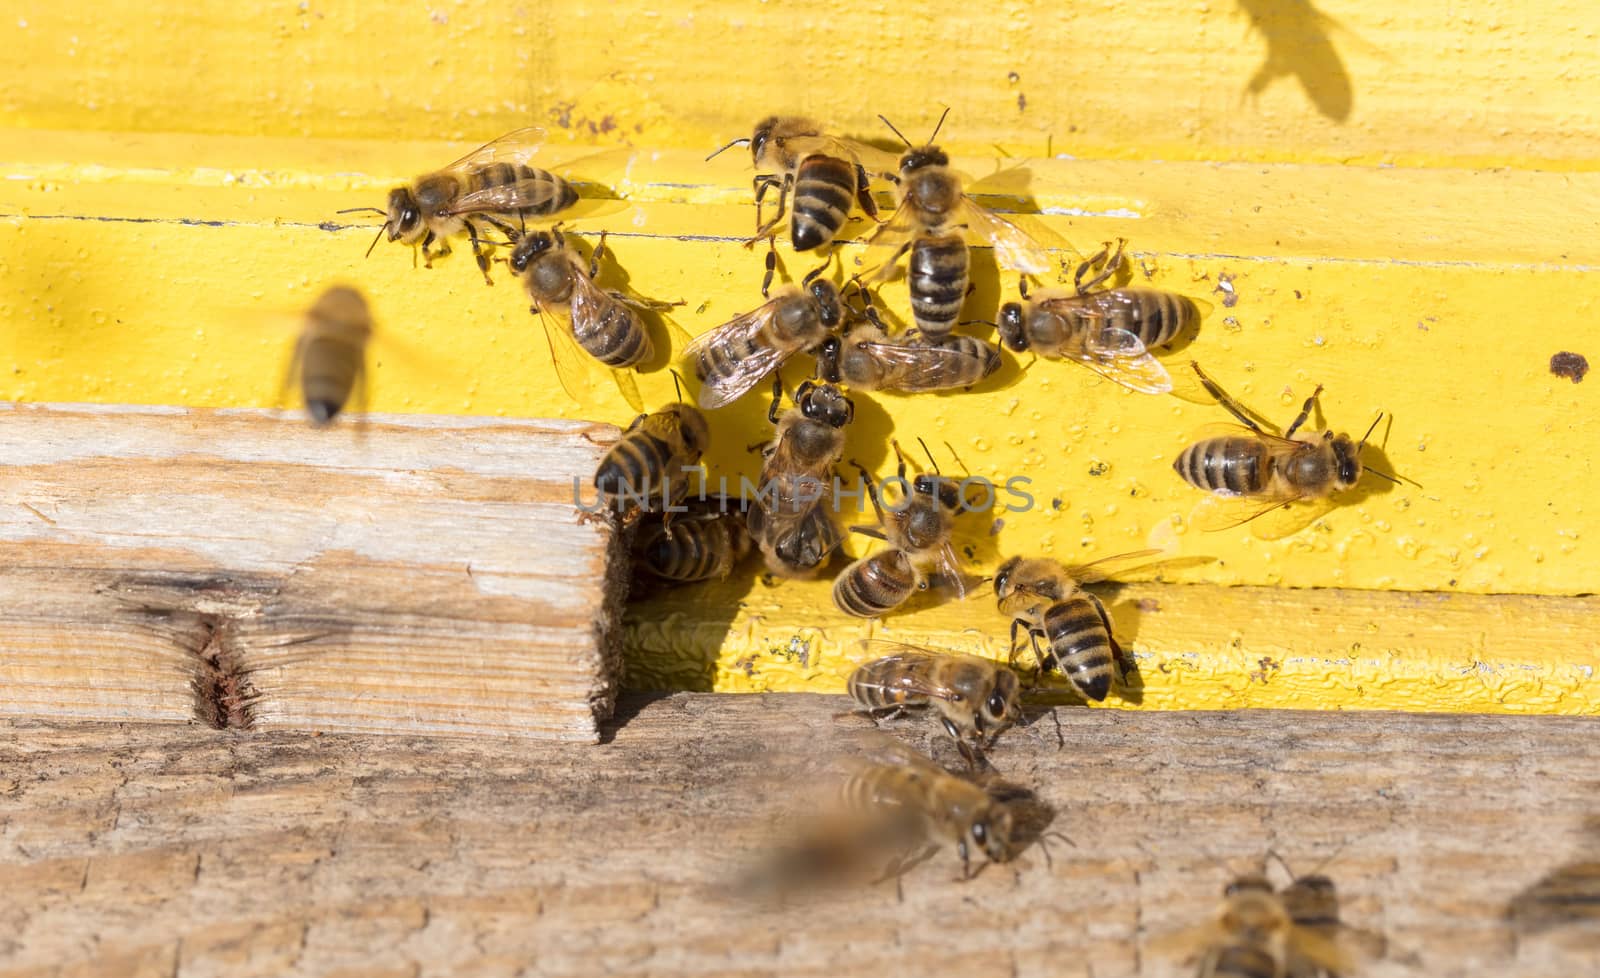 Closeup of a beehive by michaklootwijk